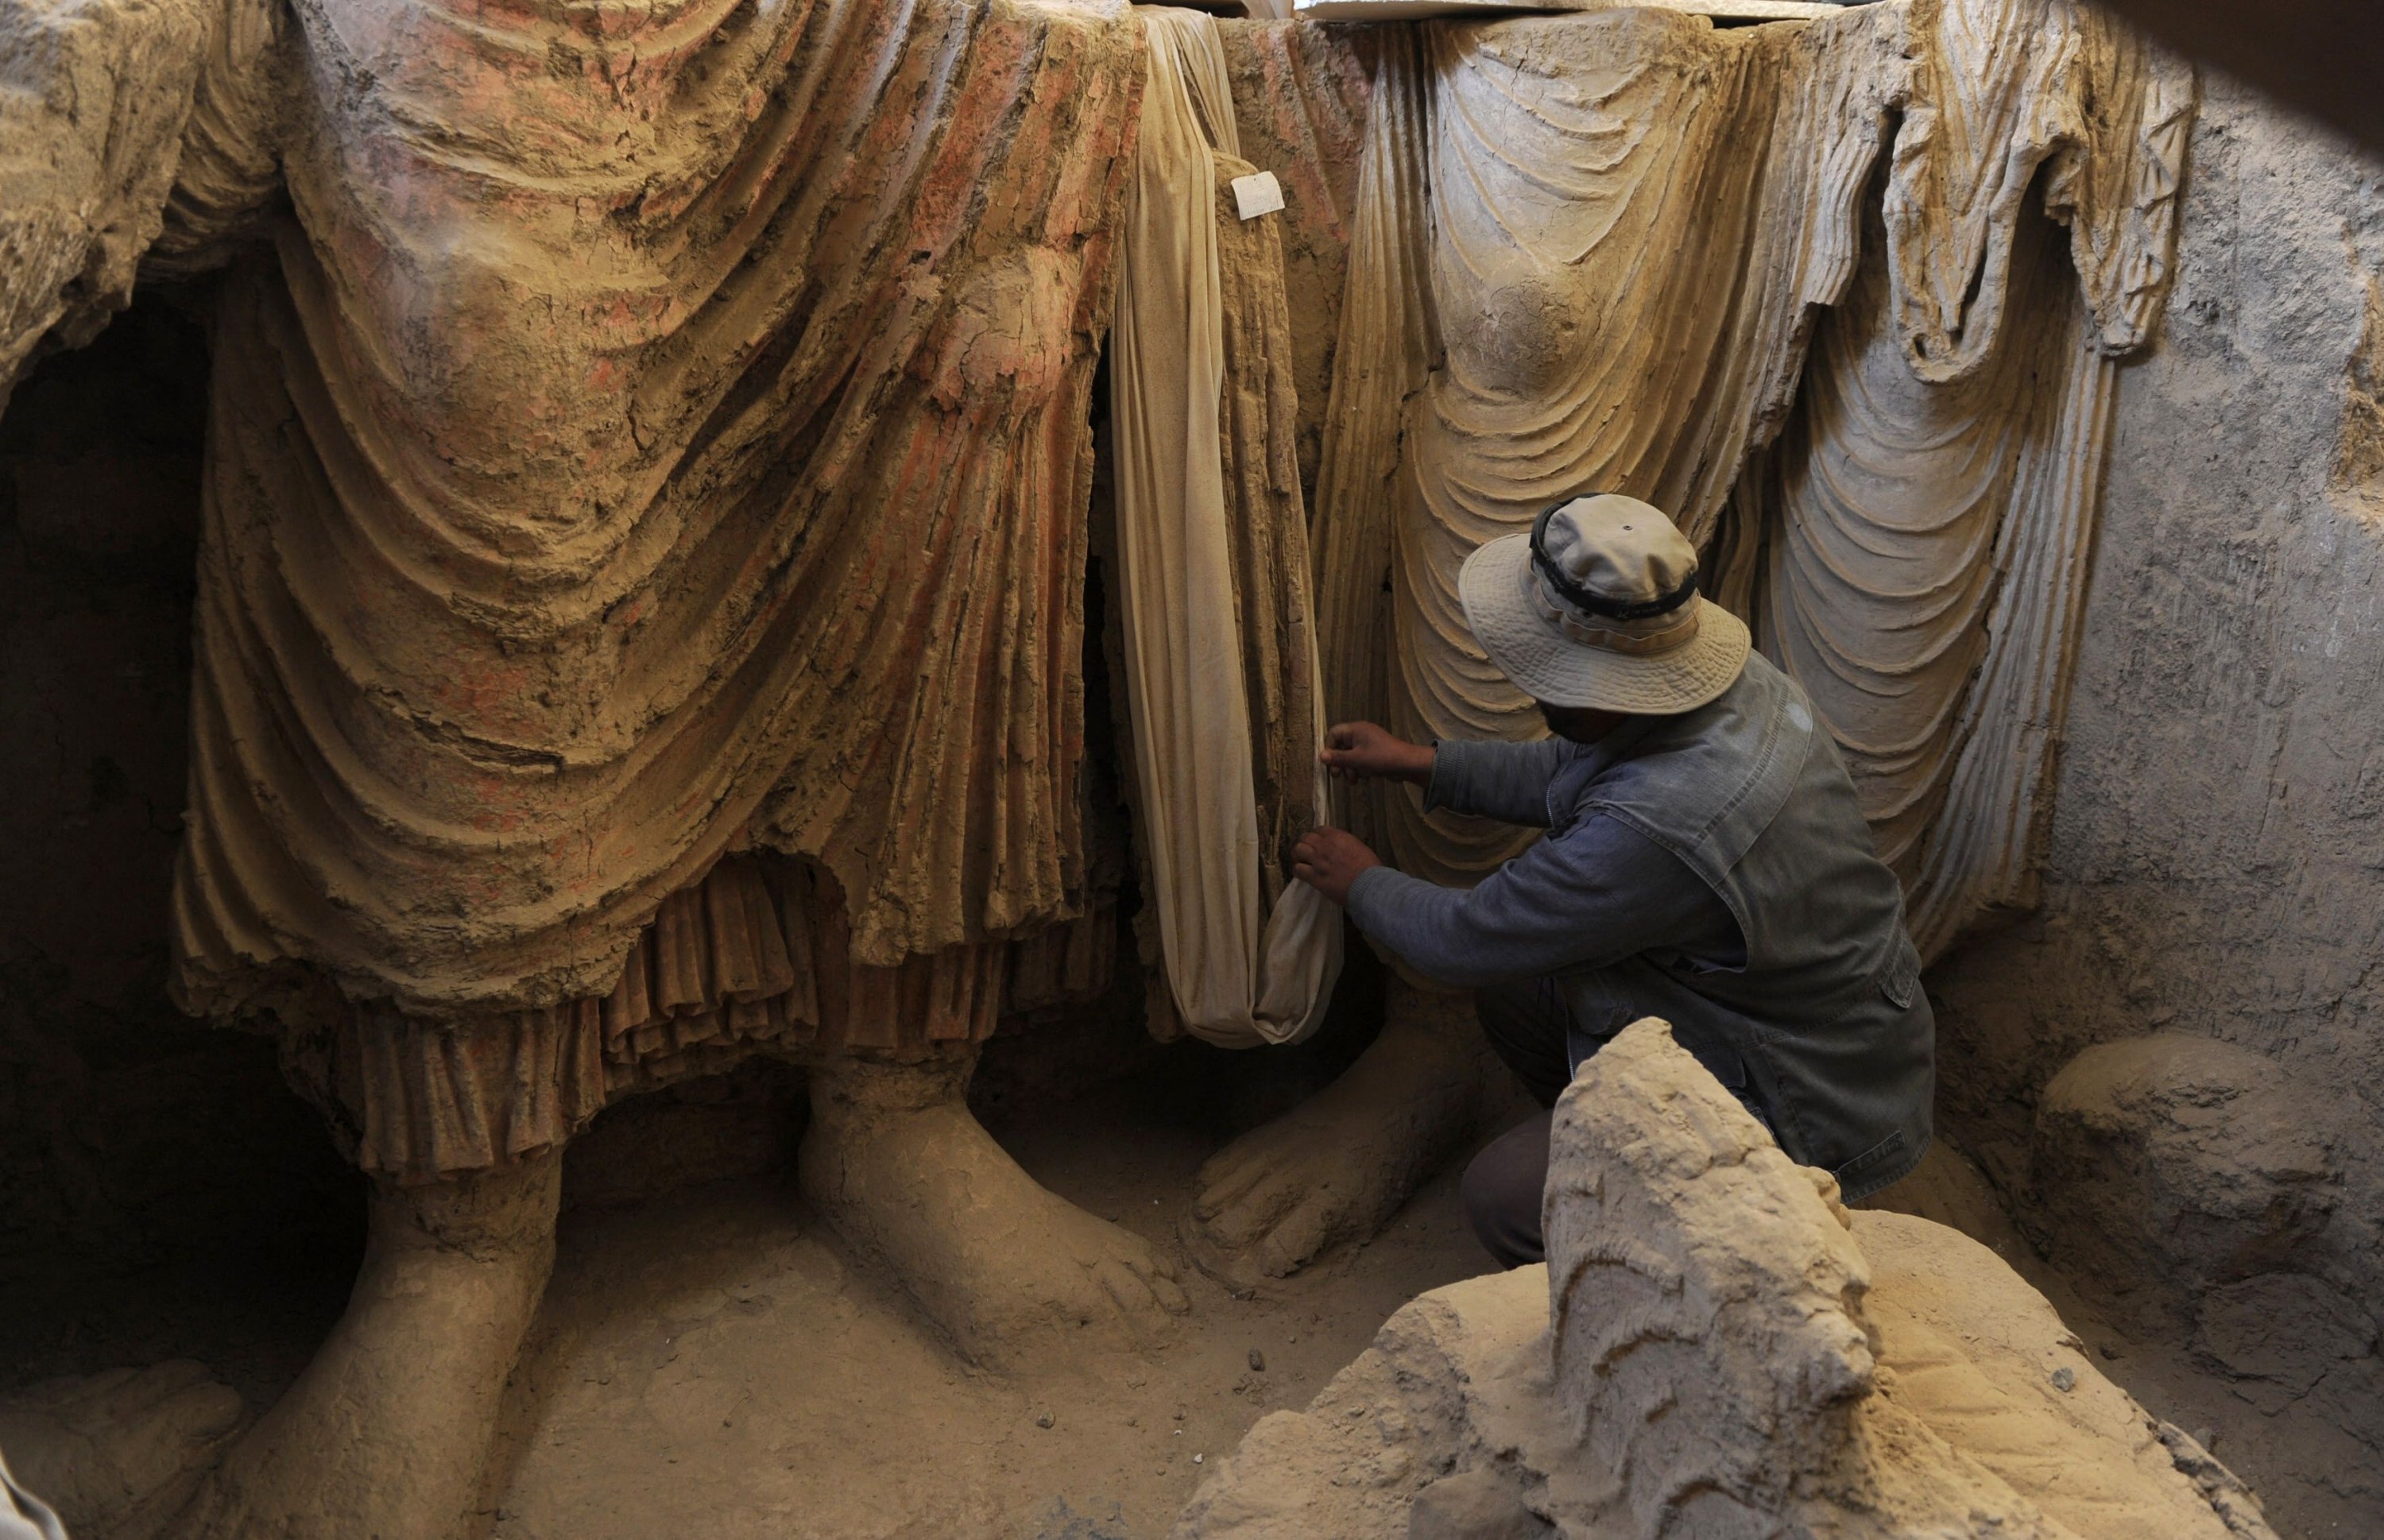 An Afghan archaeologist examines the remains of Buddha statues discovered inside an ancient monastery in Mes Aynak, in the eastern province of Logar, Afghanistan, Nov. 23, 2010. (AFP Photo)